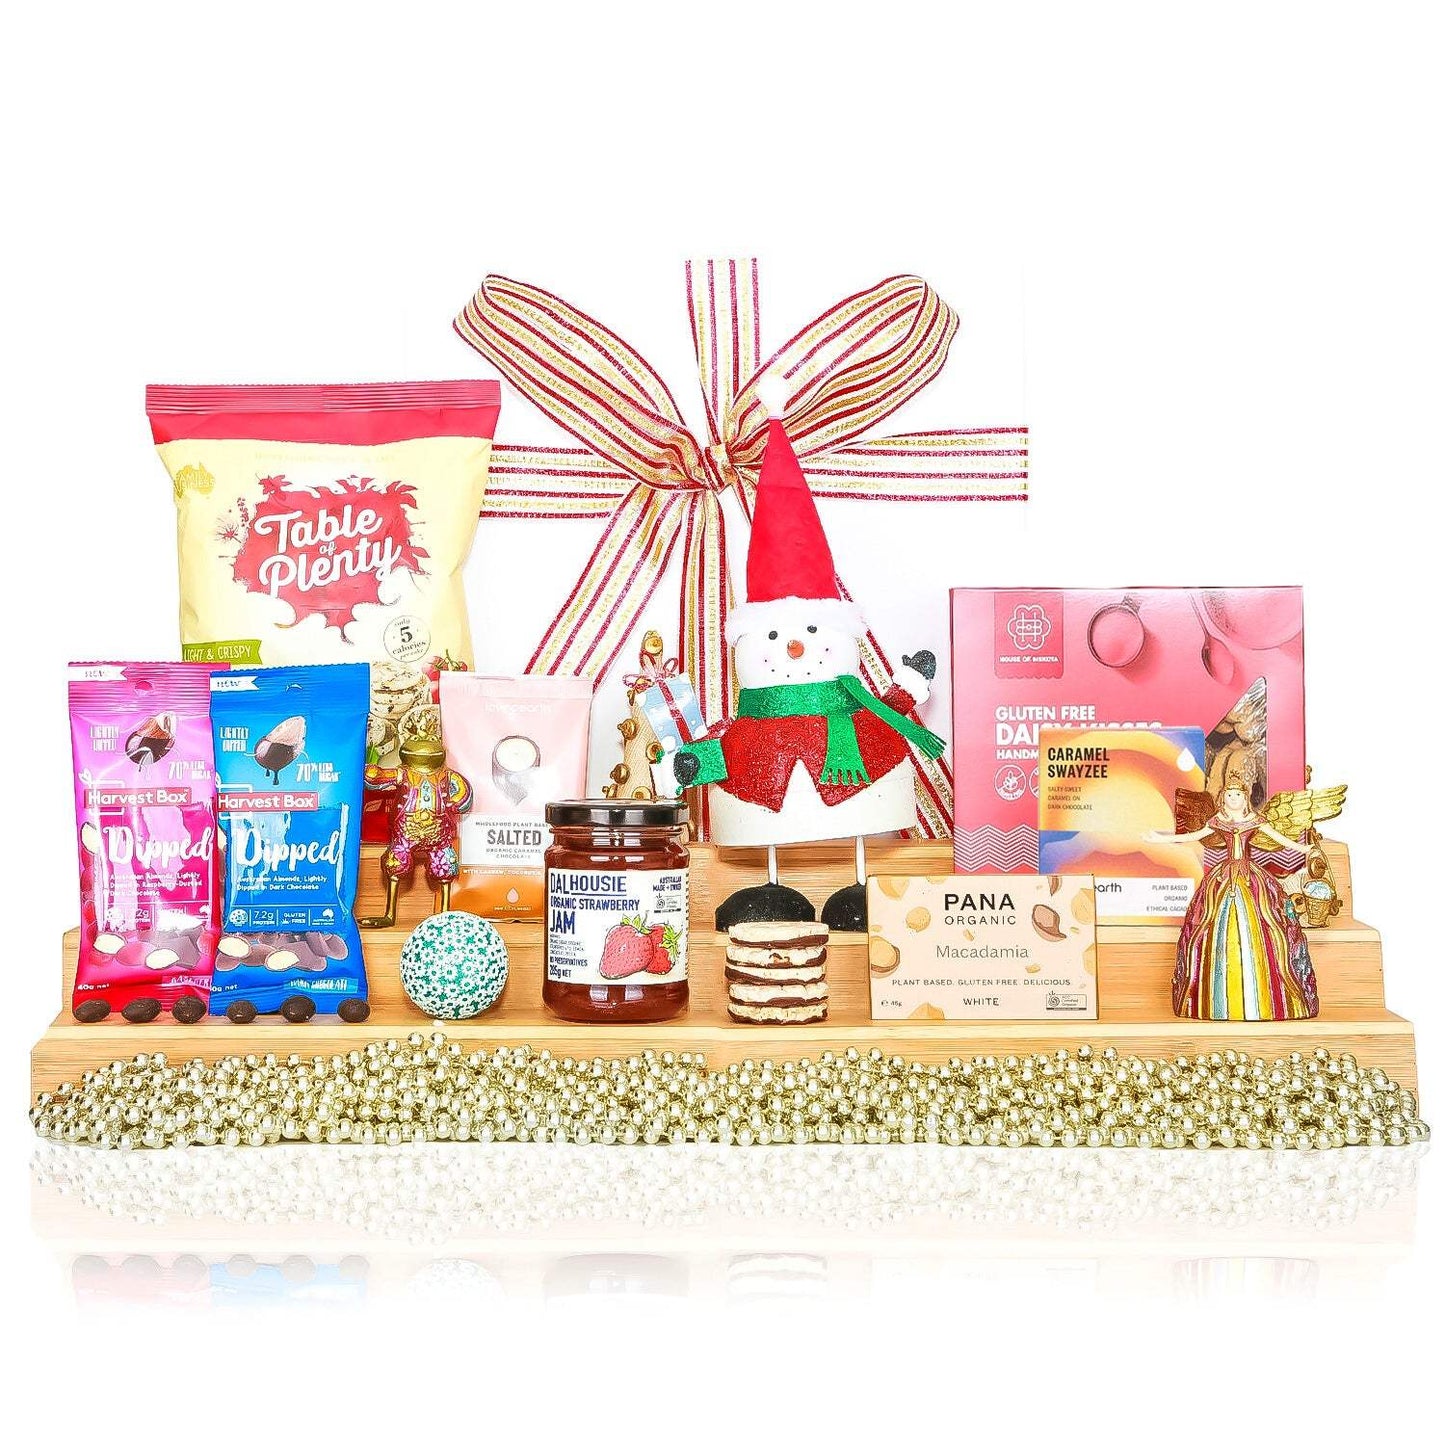 Christmas Classic - Healthy Belly Hampers - pure indulgence - birthday hampers - gift hampers - gift hampers melbourne - gift hampers australia - organic hampers -vegan hampers - gluten free hampers - birthday hampers -anniversary hampers - wedding hampers - alcohol hampers